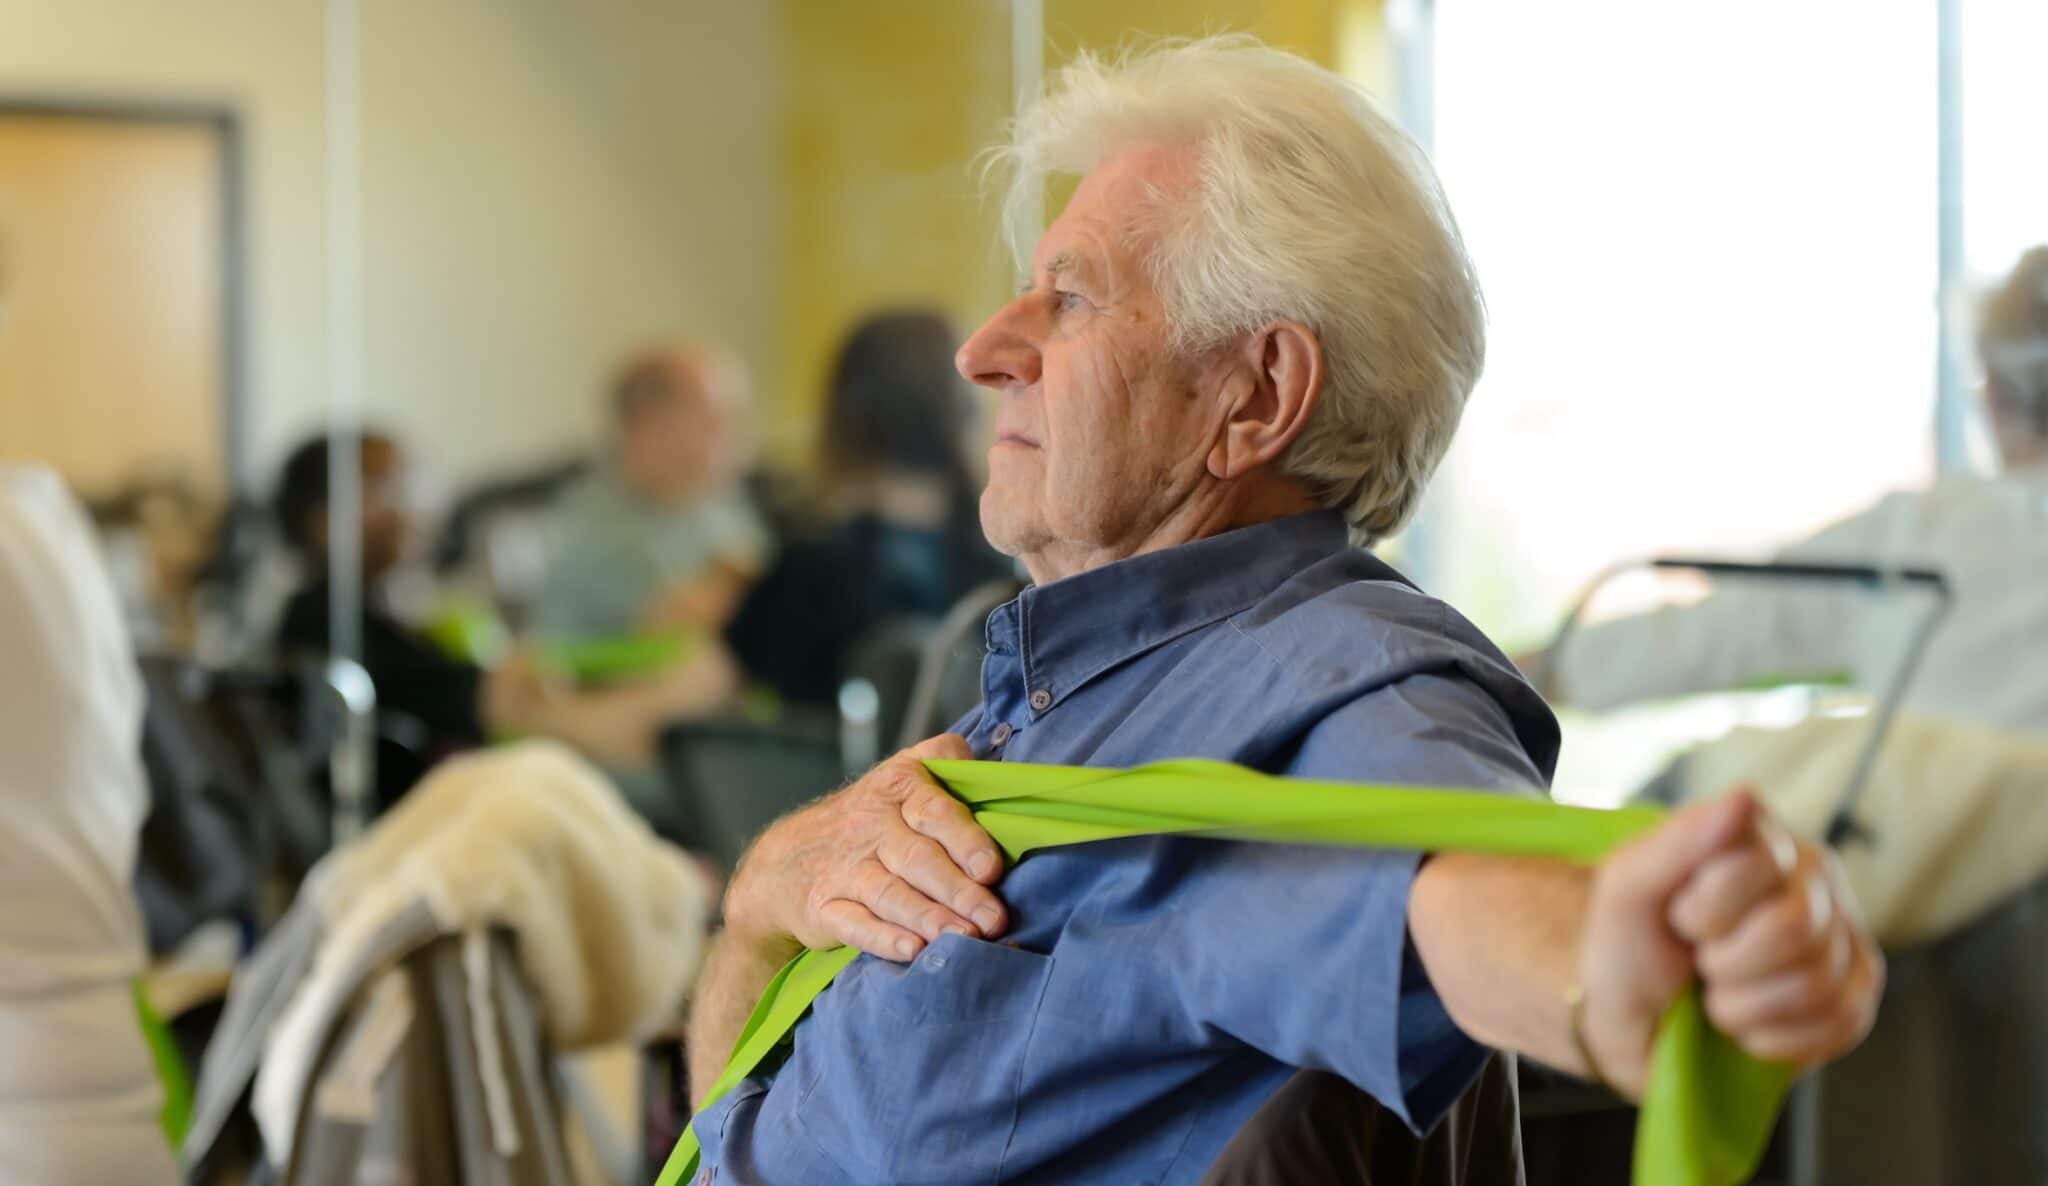 Mature man stretches exercise band